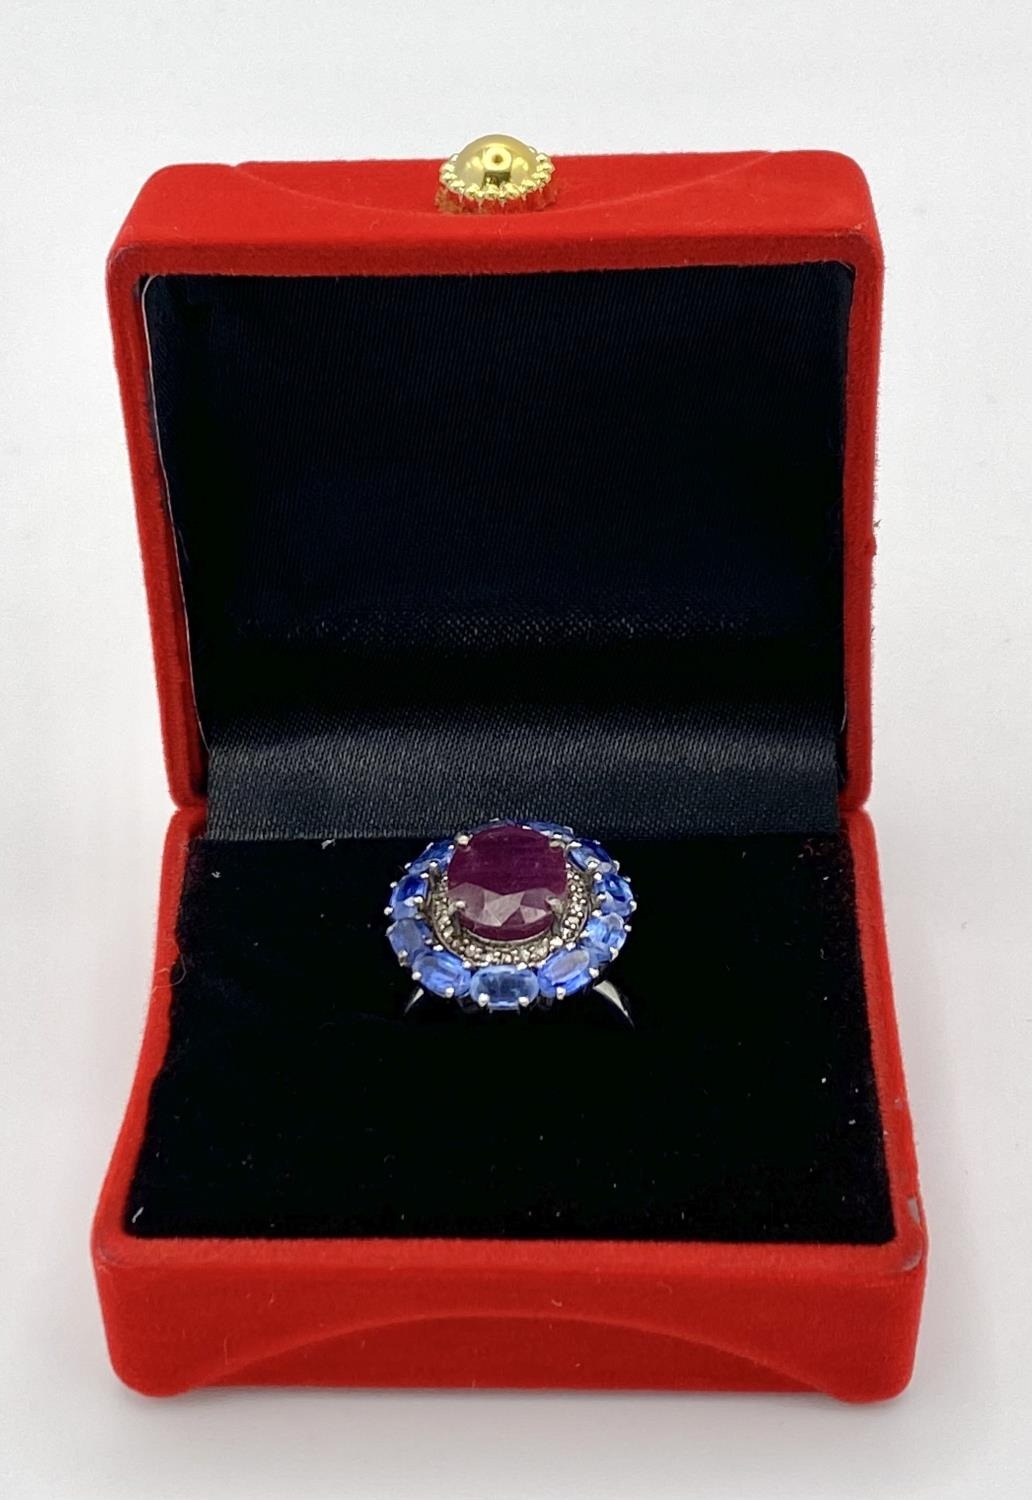 A 5.65ct Ruby Dress Ring with Halo of 0.40ctw of Diamonds and 3.70ct of Kyanite Stones. Set in 925 - Image 7 of 7